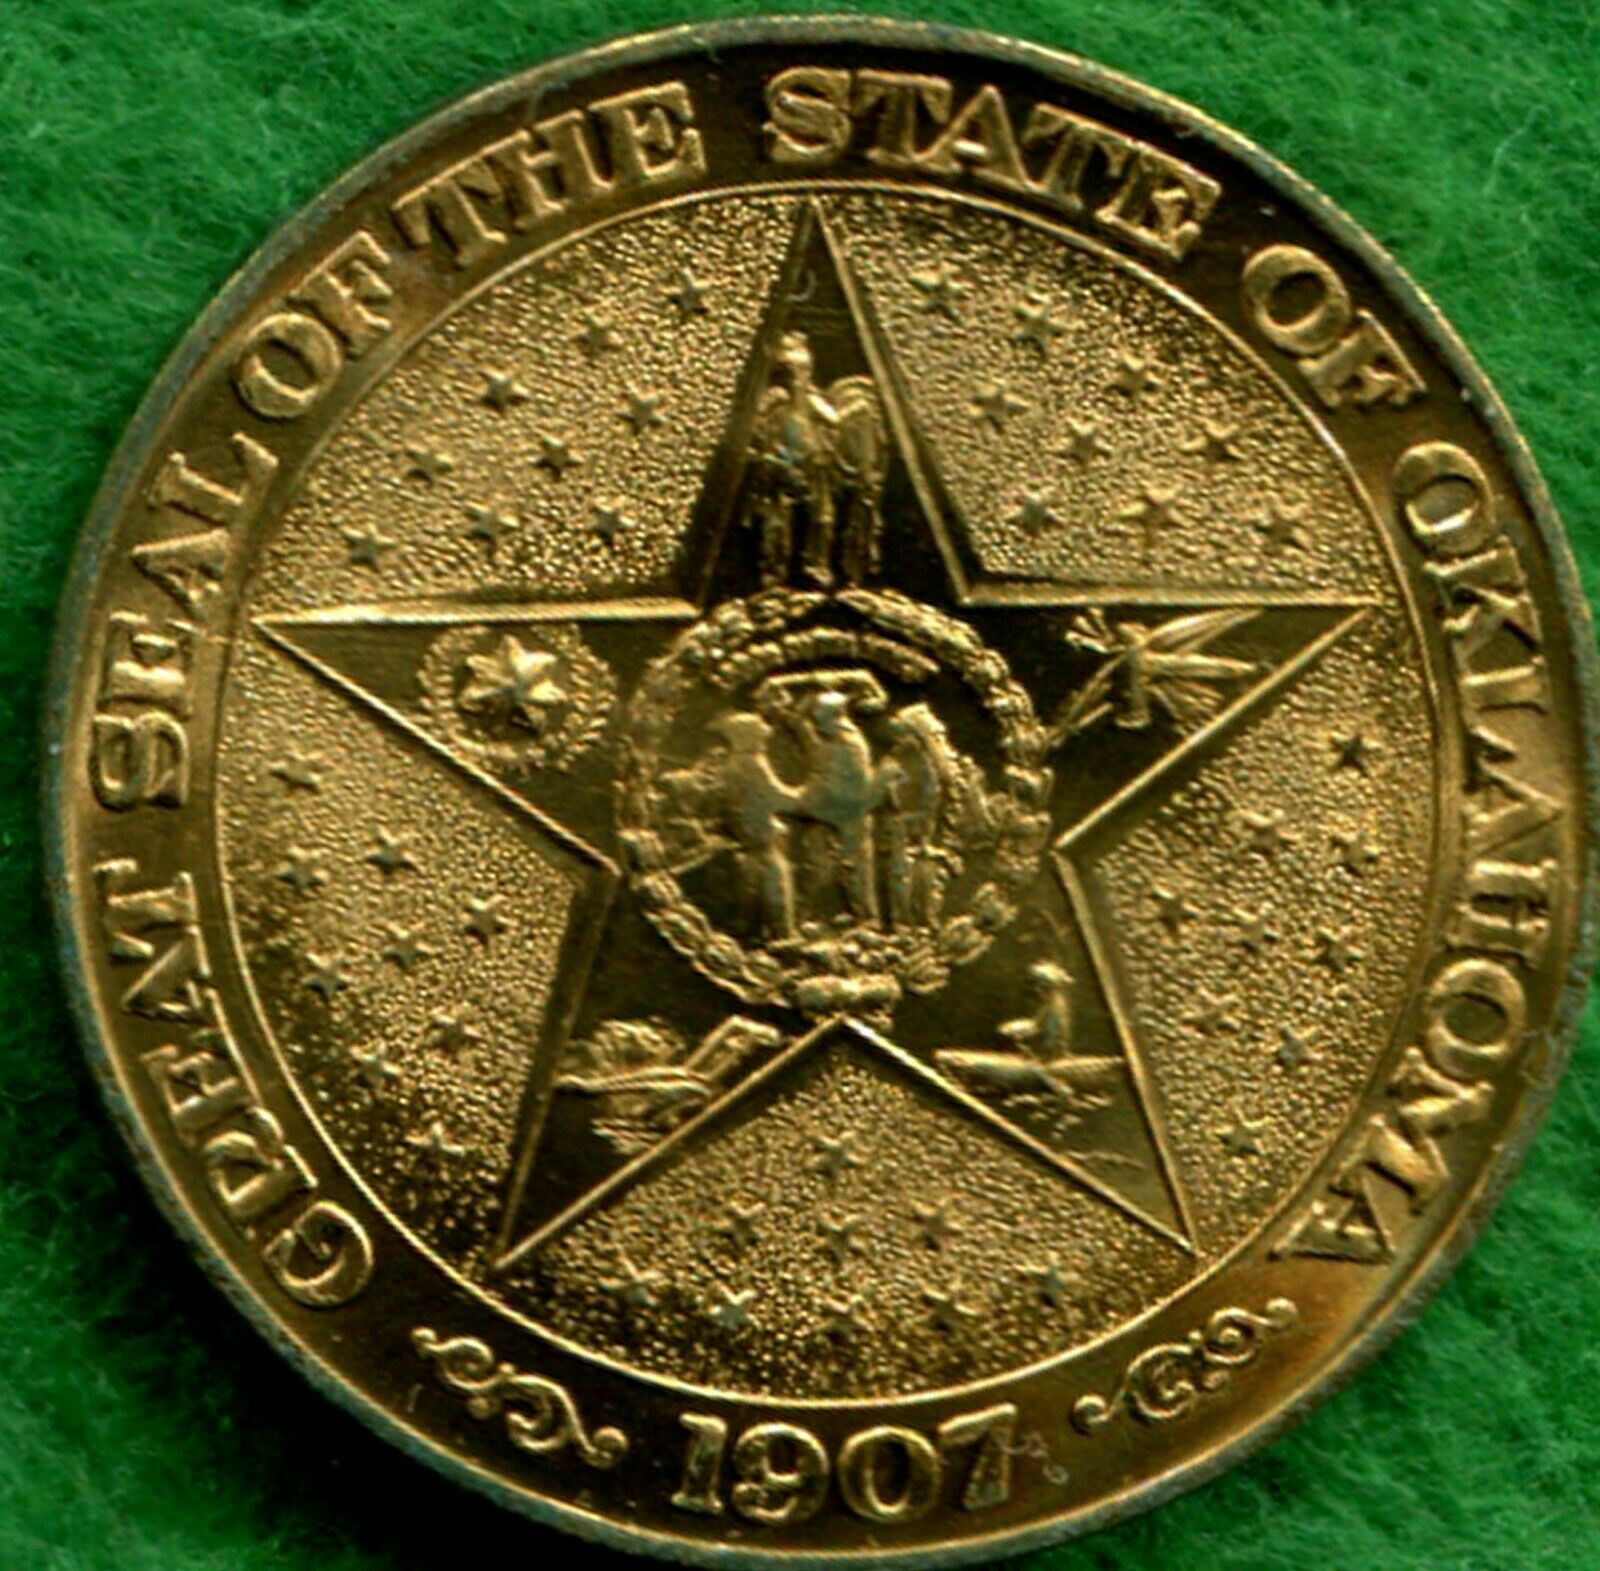 Oklahoma 50th Anniversary Brass Medal ~ The 46th State 1907-1957 ~ Uncirculated